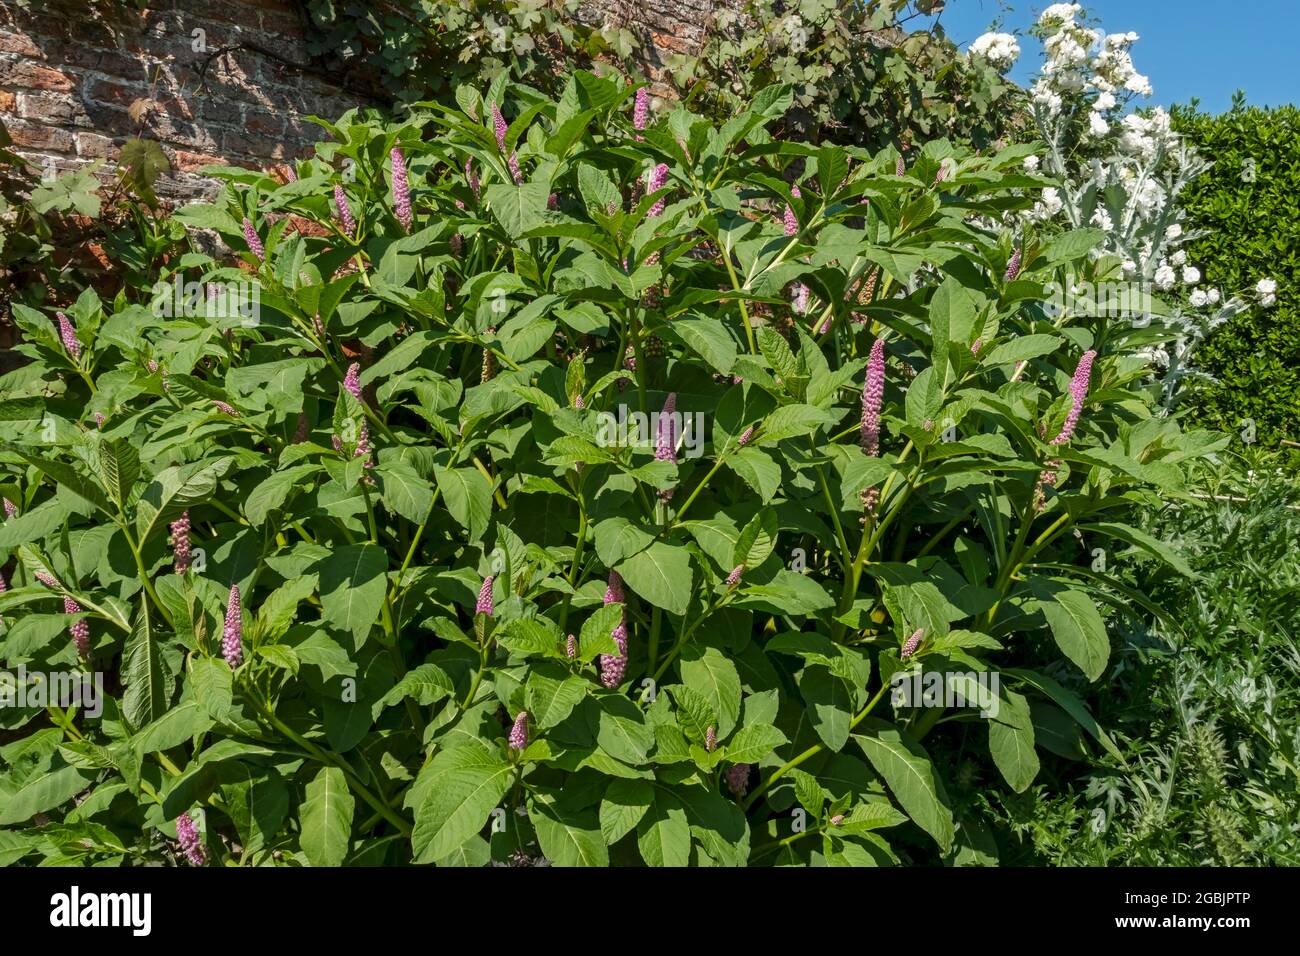 Pink flowers flower of common pokeweed (Phytolacca) in summer England UK United Kingdom GB Great Britain Stock Photo